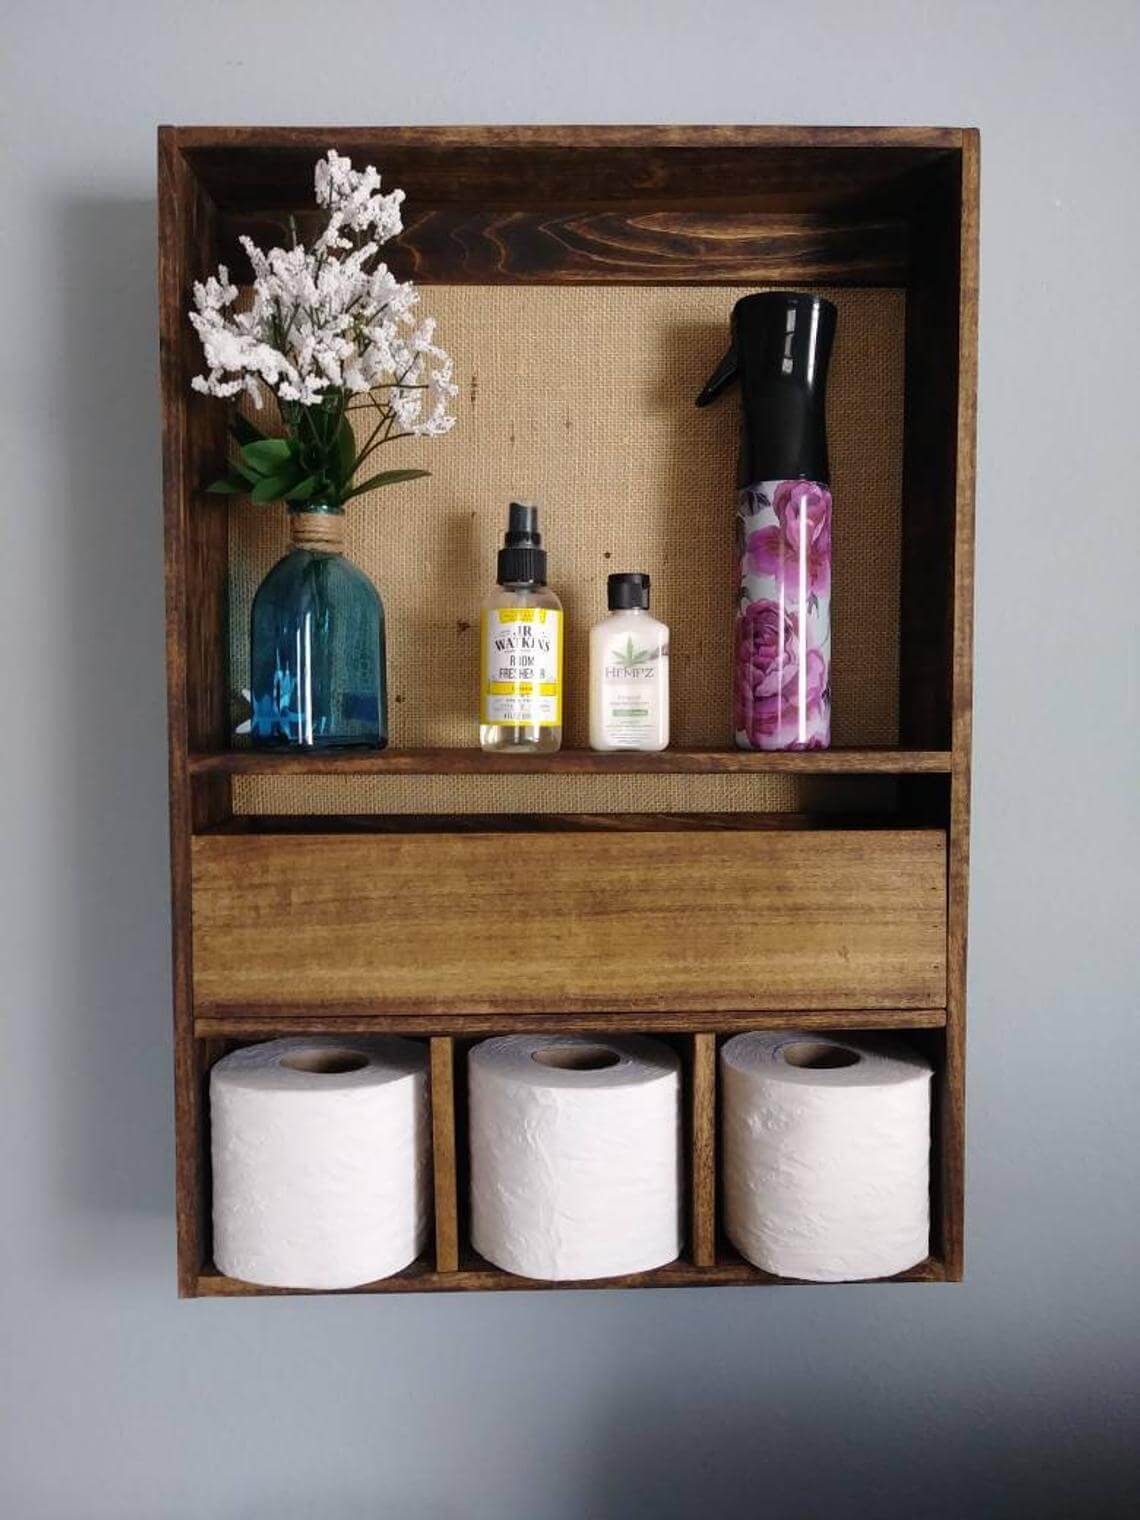 modern cubby over toilet storage shelf with rolls of toilet paper